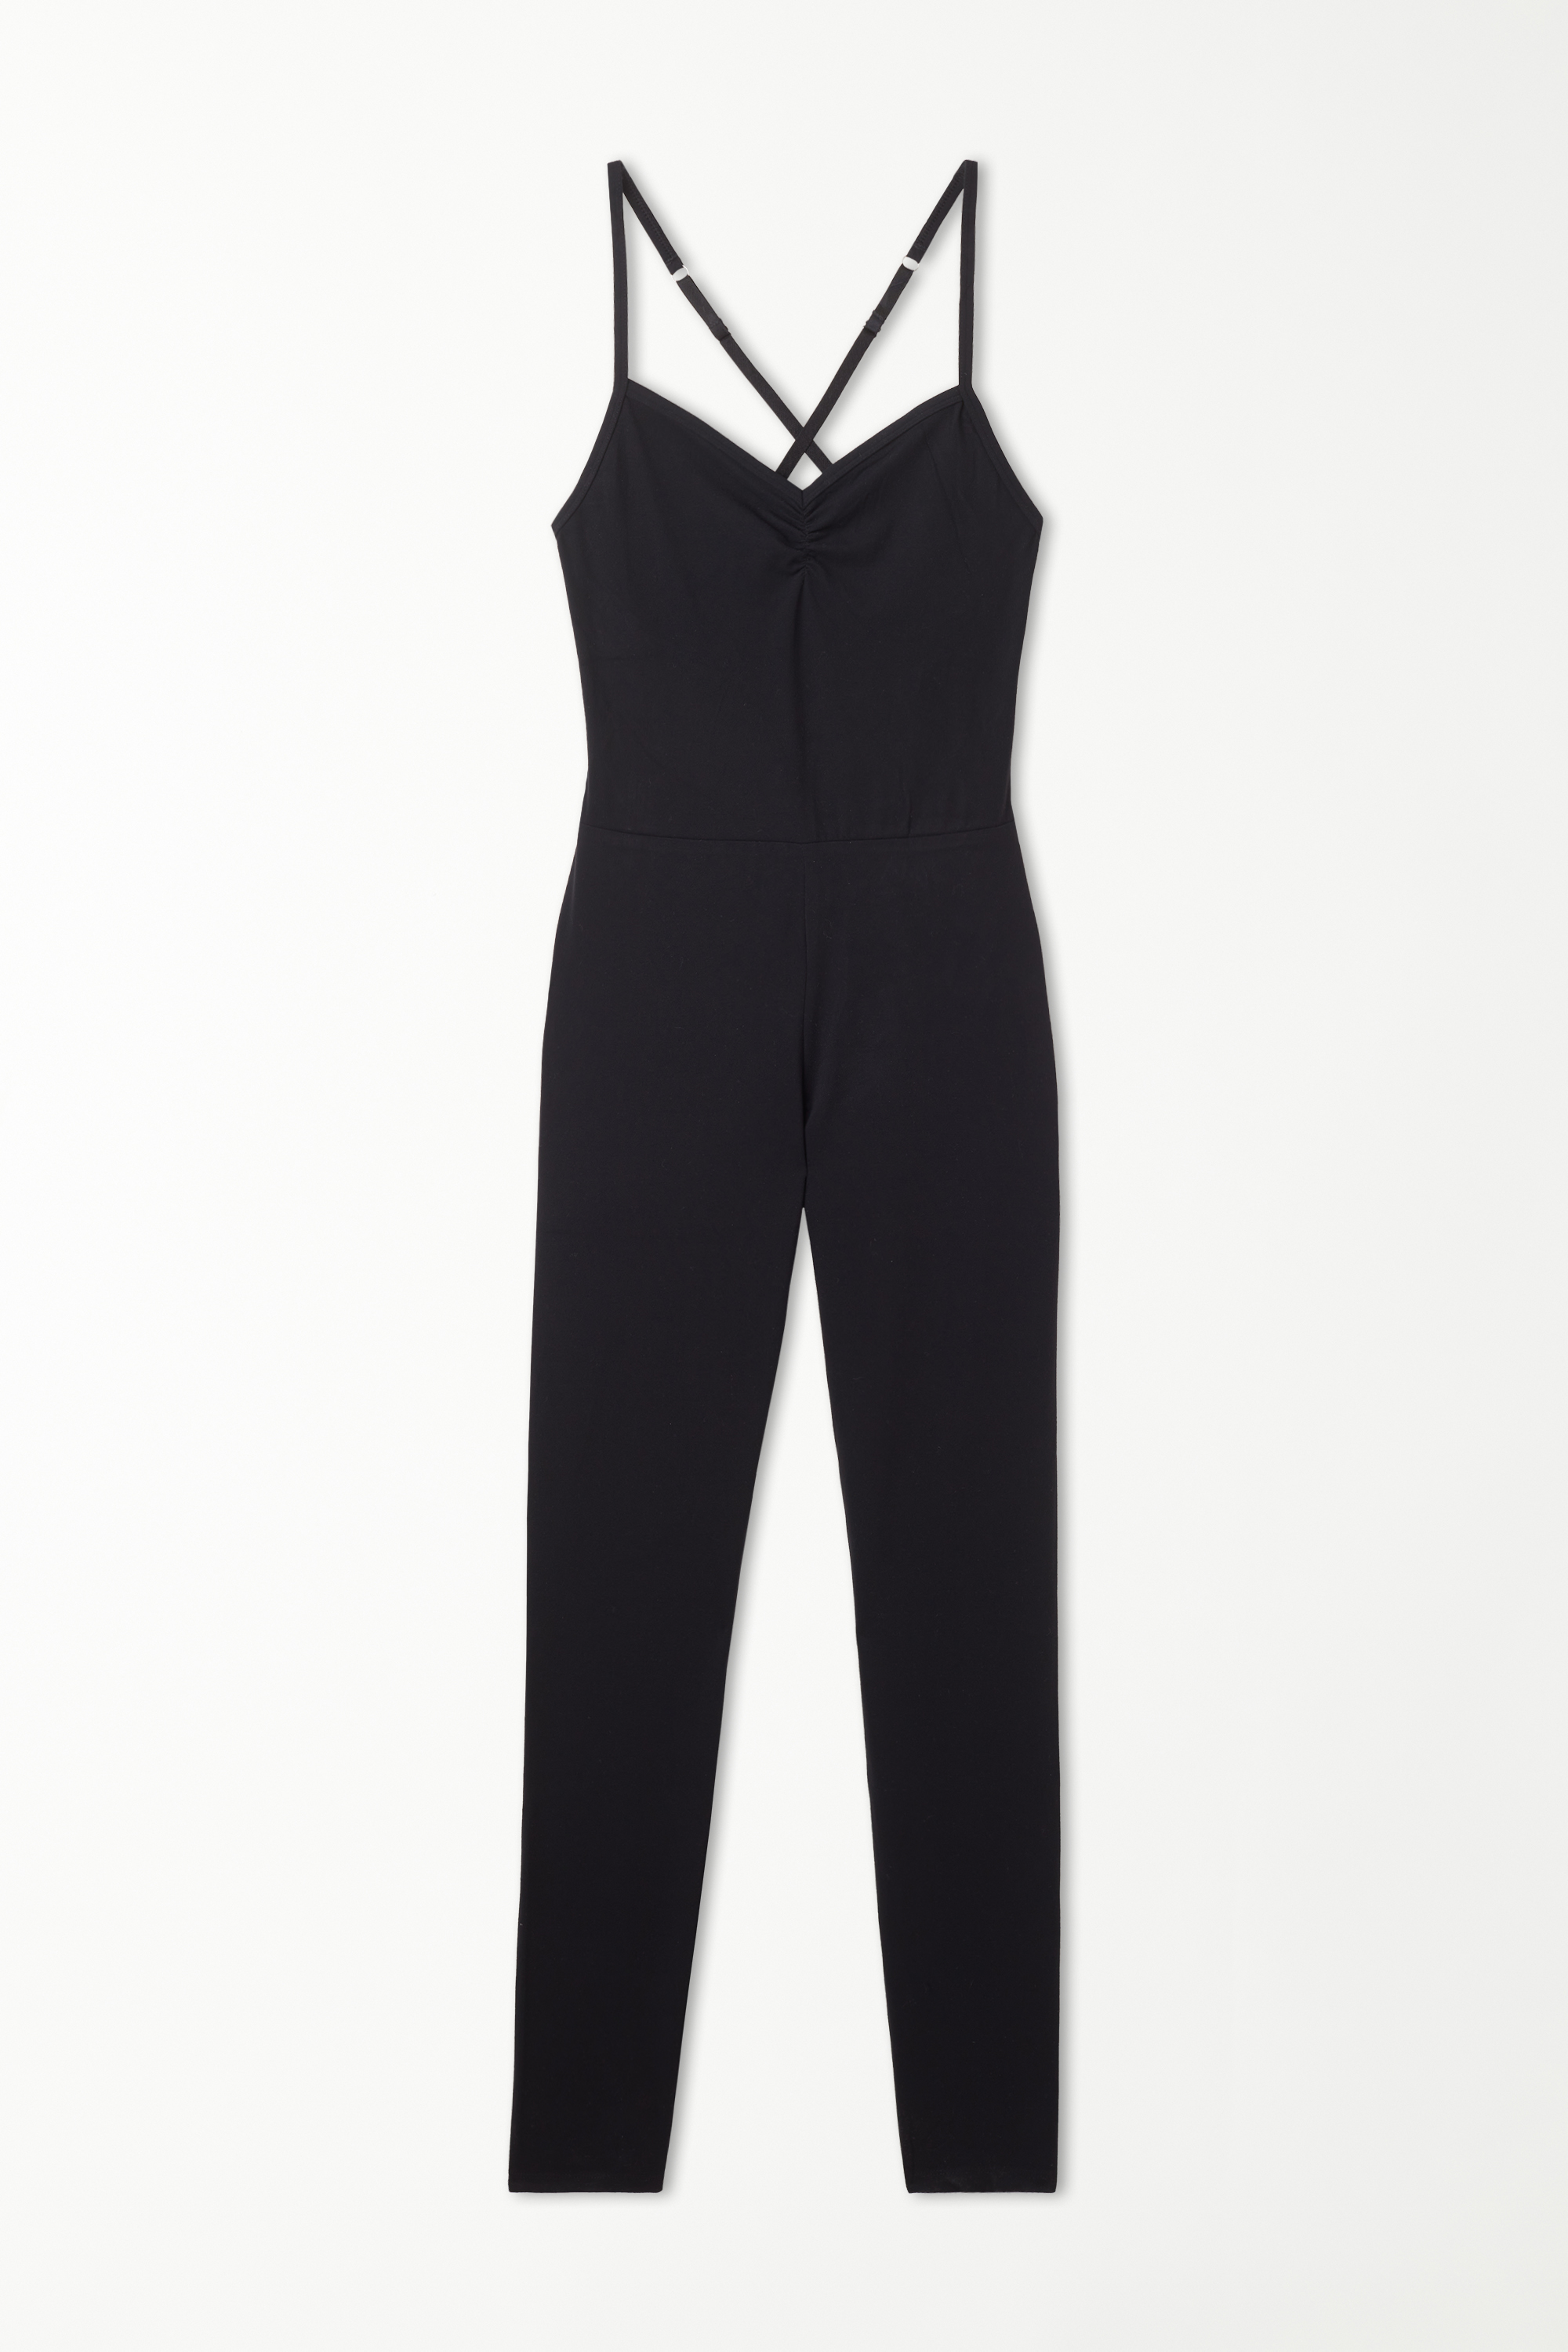 Ruched Soft Microfiber Thin Strap Full Length Jumpsuit